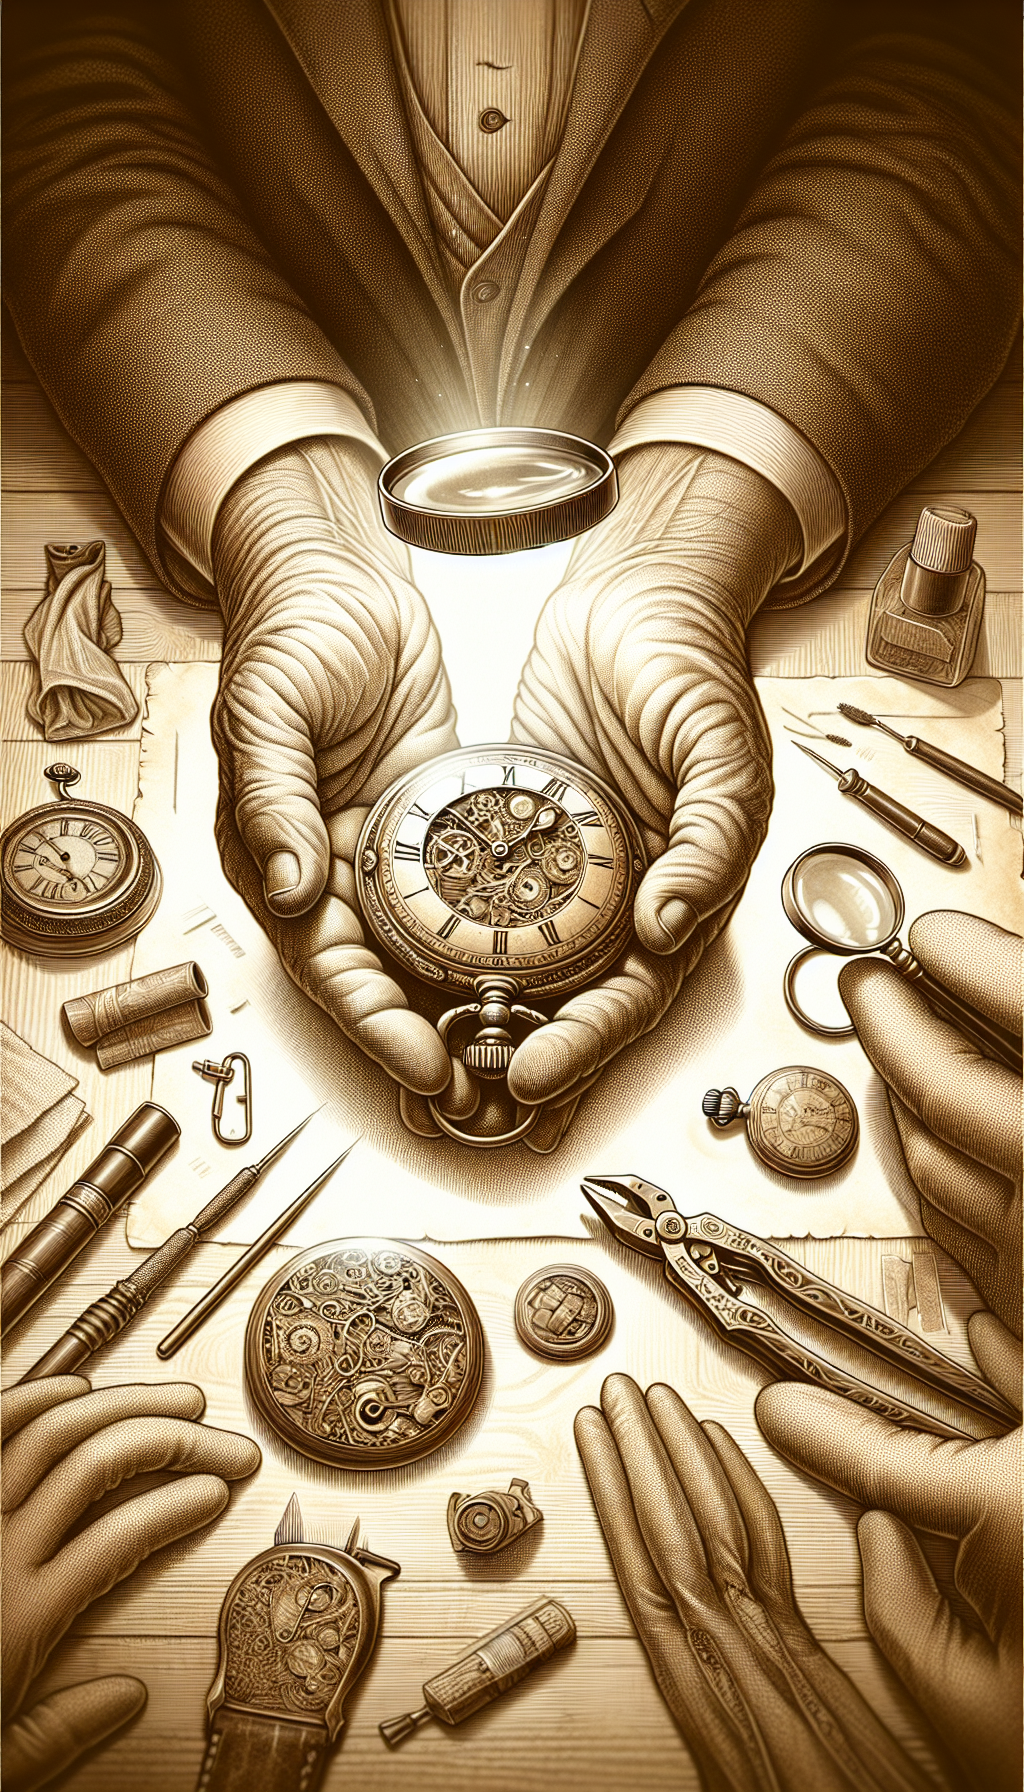 An intricate, sepia-toned illustration showcases an elderly pair of hands cradling a delicate antique pocket watch, its back opened to reveal the engravings. Hovering above, a magnifying glass reveals subtle details and maker's marks, surrounded by smaller vignettes depicting cleaning tools, gloves, and a softly glowing appraisal document. The juxtaposition of old-world charm and meticulous care breathes life into timeless preservation.